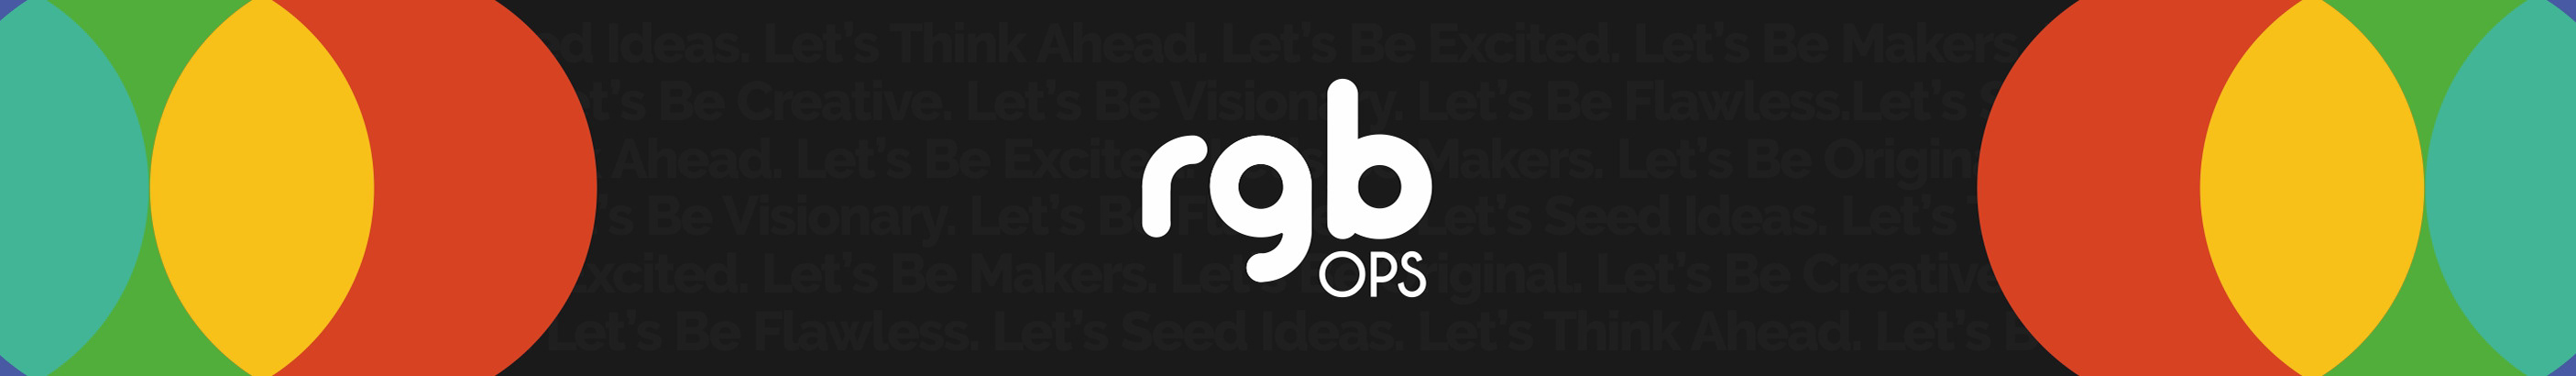 RGB ops's profile banner